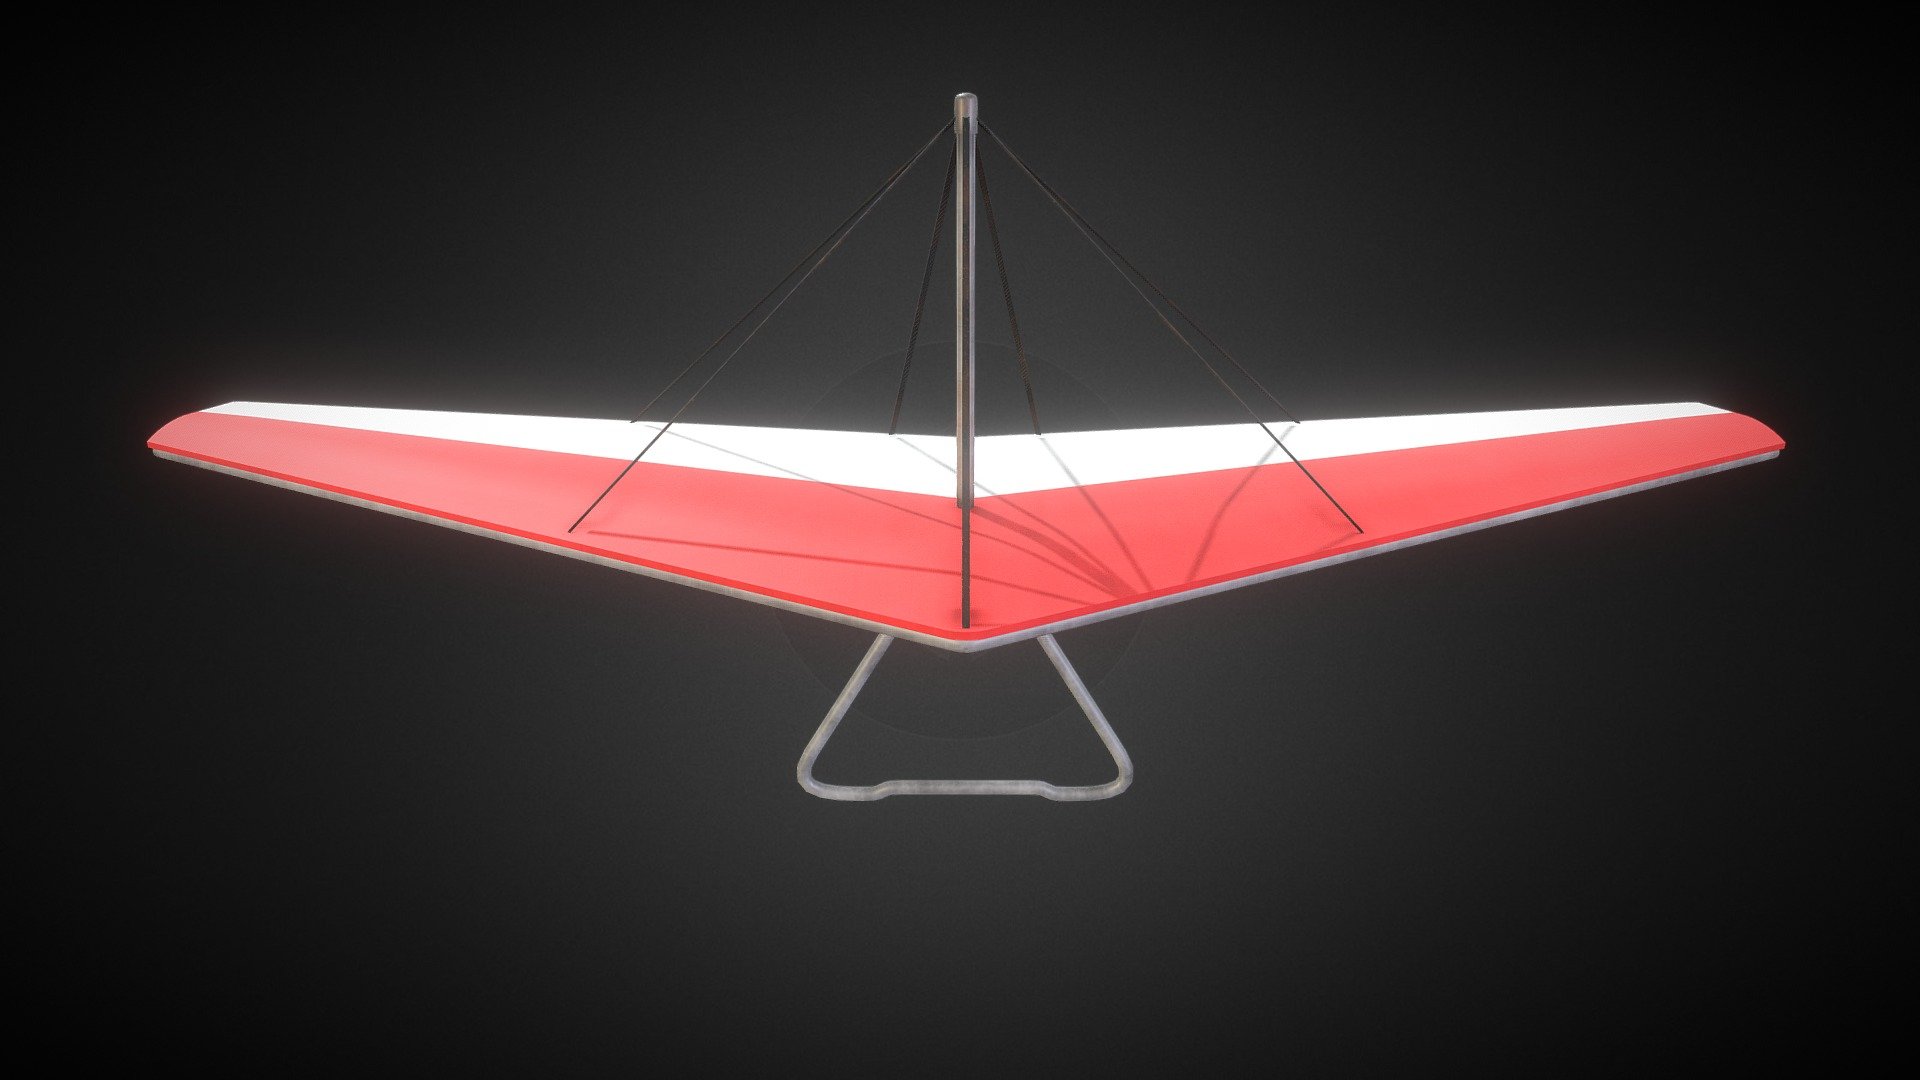 Game-ready lowpoly model of a hang-glider which is easy to implement in your game, this model can also be used for commercial or other purposes. Don't worry about licencing because this model is completely royalty-free, which means you can use it for anything without giving credit.

Textures are included at 4k resolution!

Features




High quality glider 3d model

BaseColor

Metallic map

(Please contact me if you need a different format.) - Hang Glider Lowpoly - Buy Royalty Free 3D model by Polycat Games (@polycatgames) 3d model